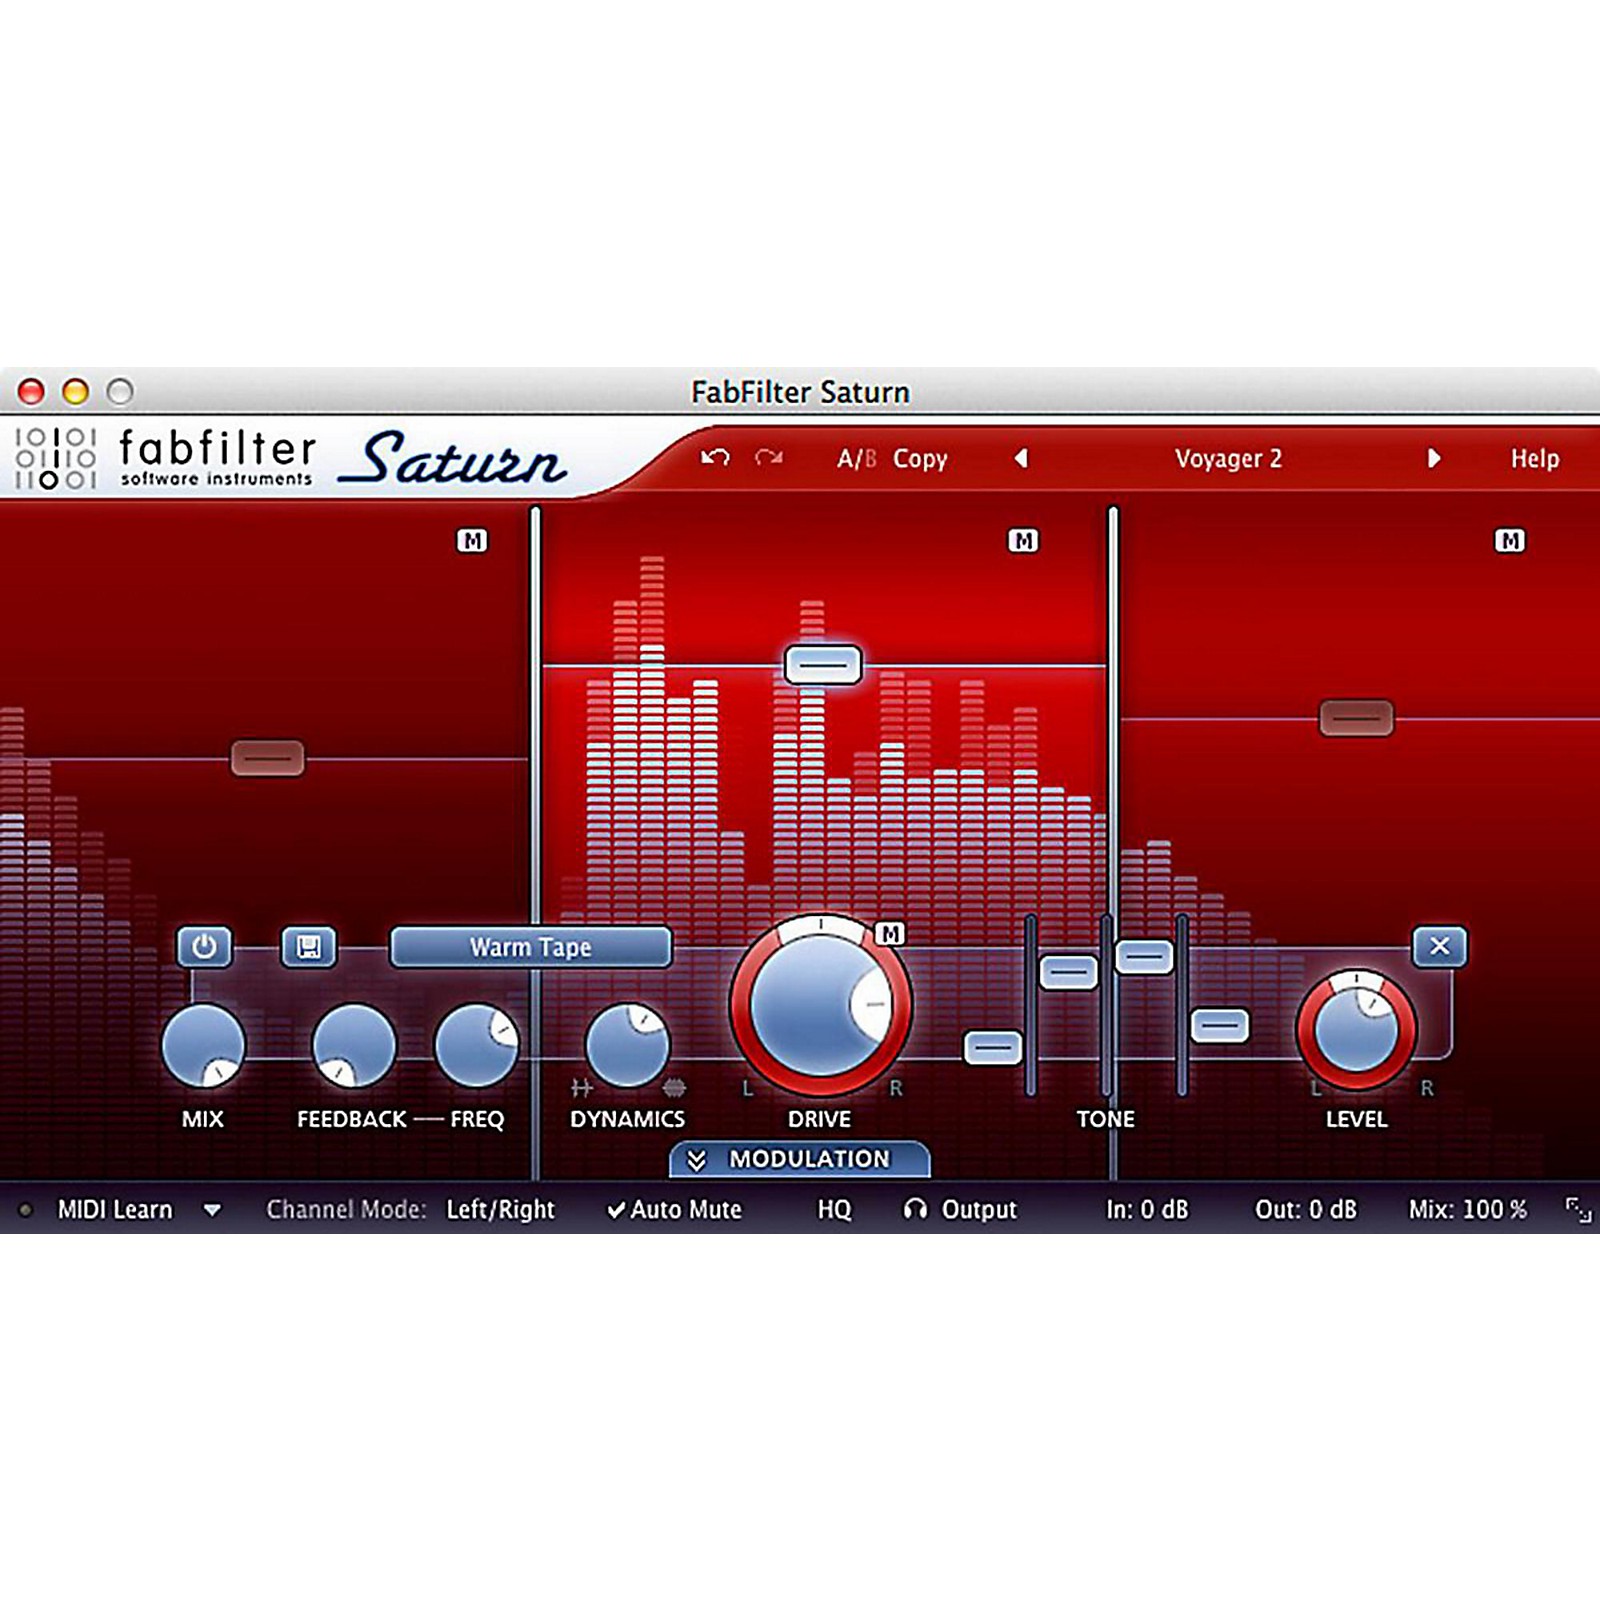 download the new for ios FabFilter Total Bundle 2023.06